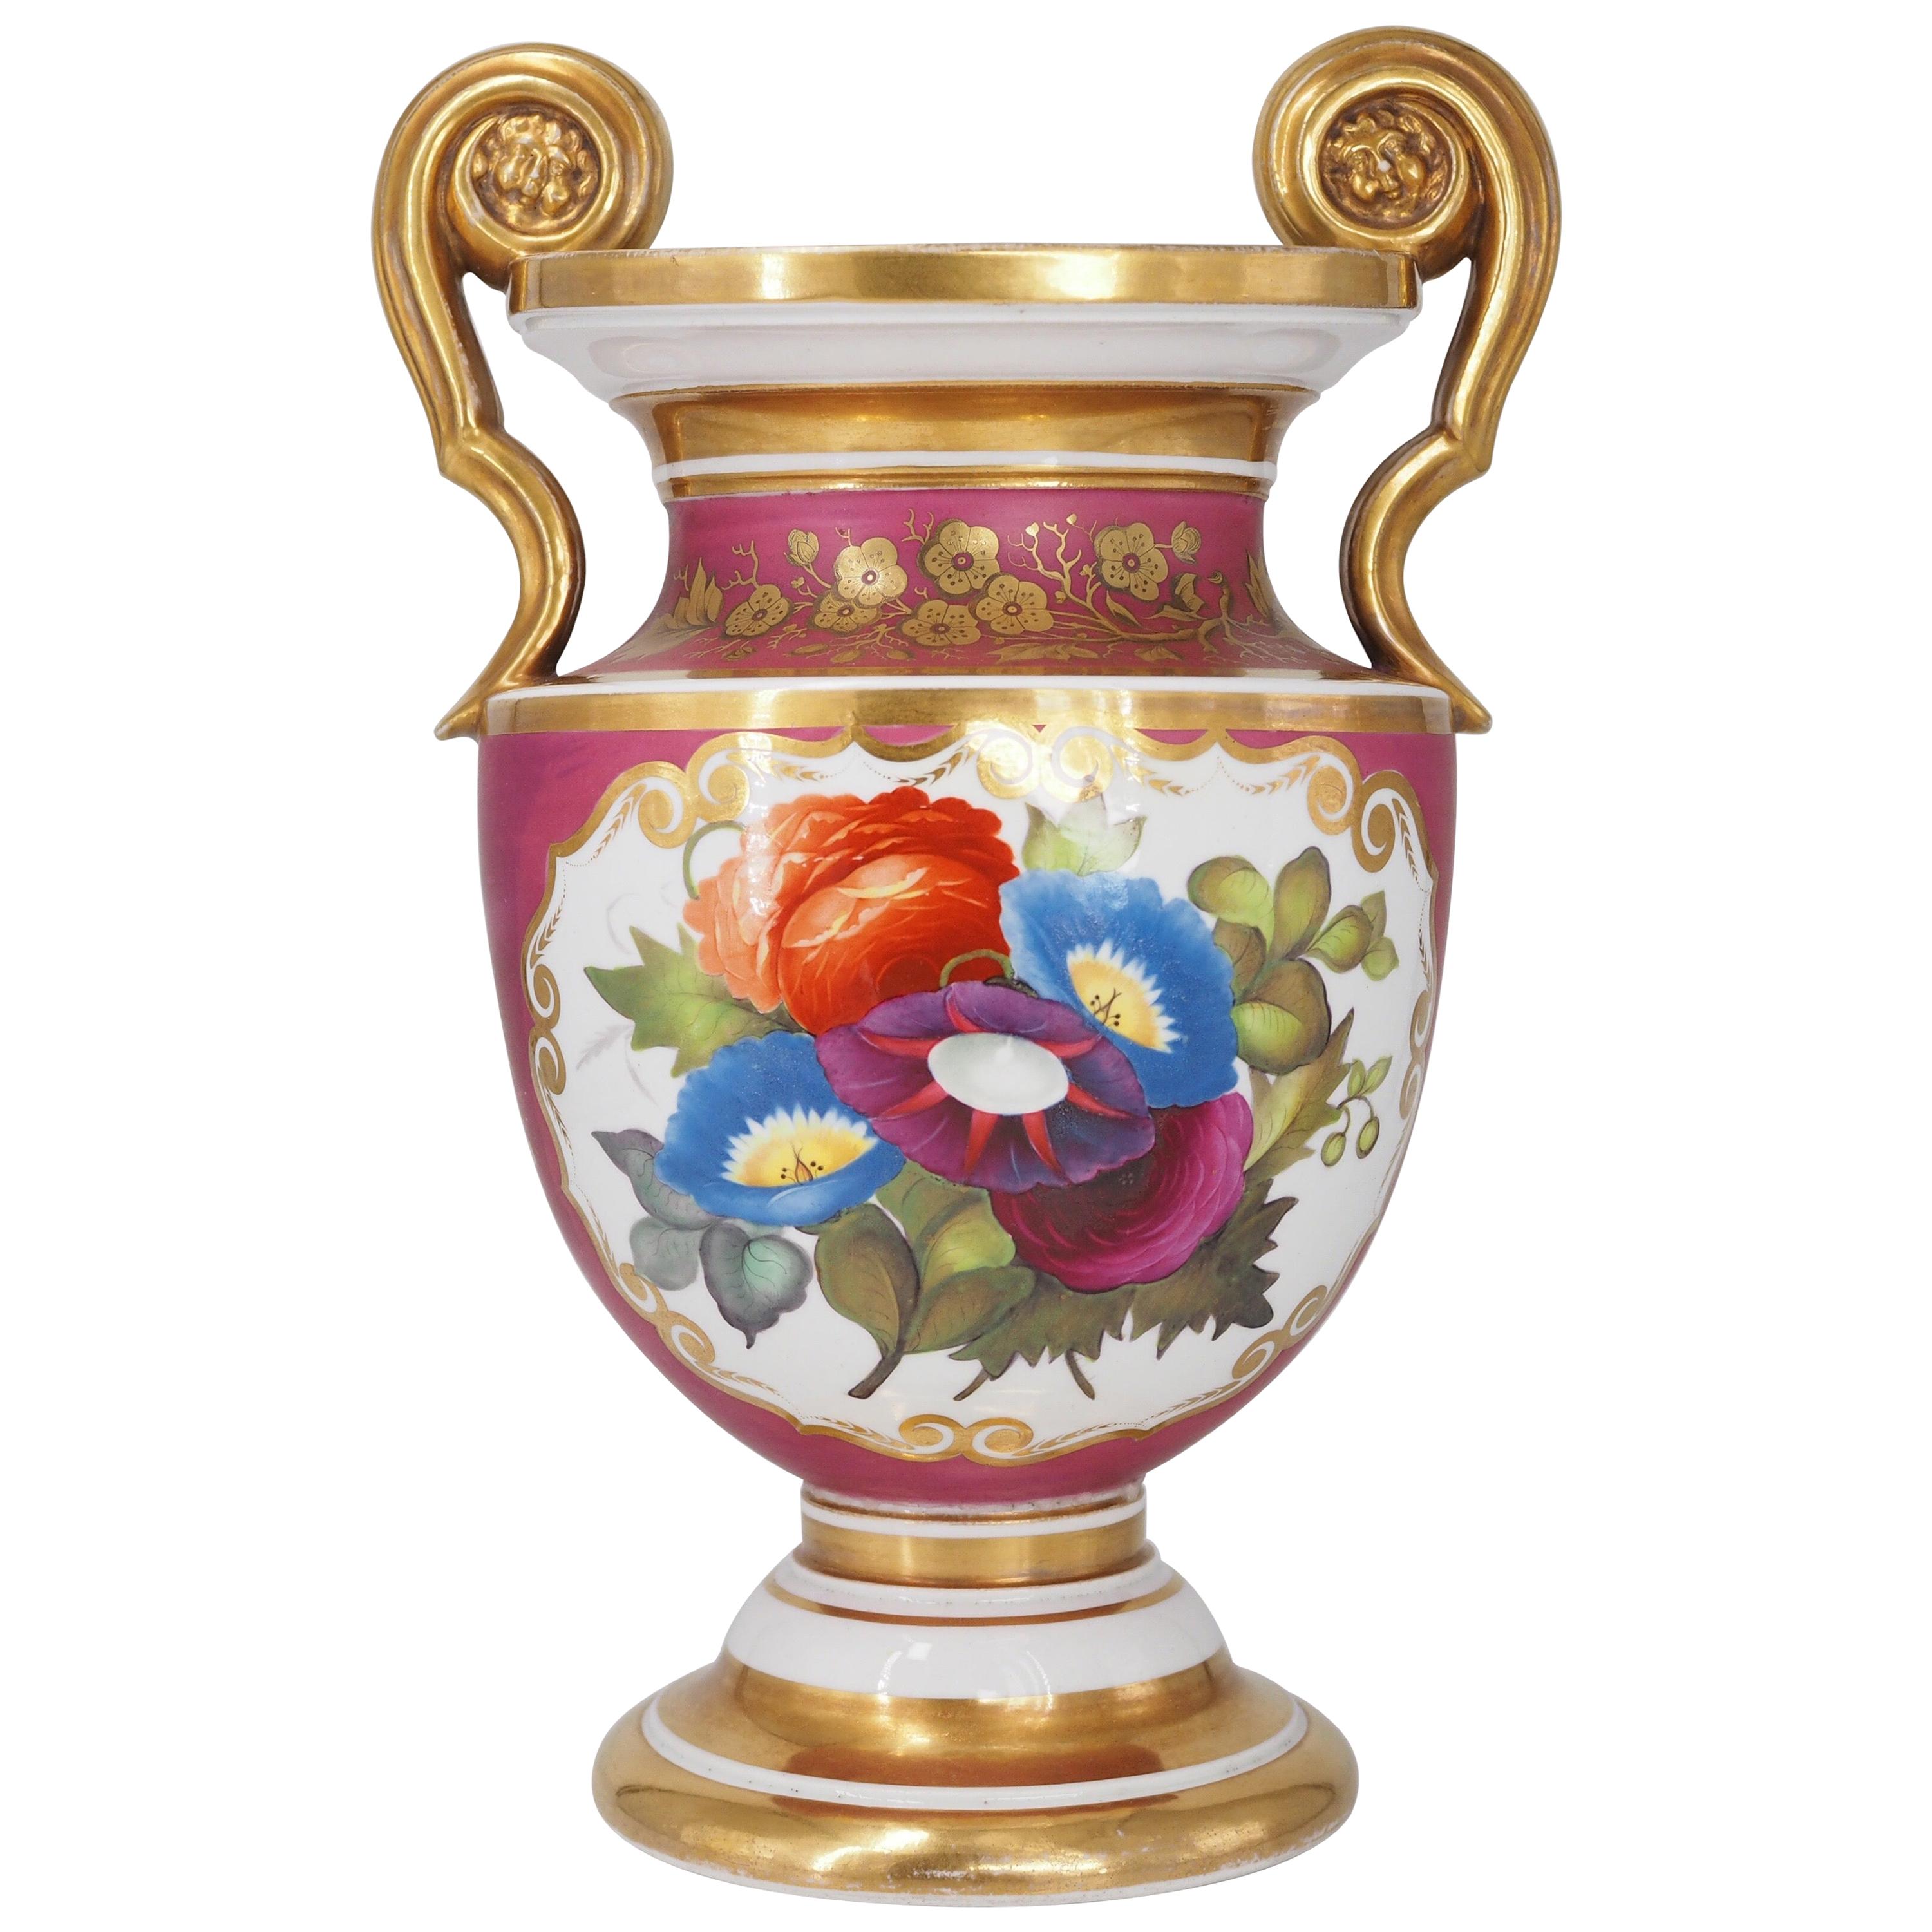 English Porcelain Classical Vase with Flower Panels, Claret Ground, c. 1825 For Sale